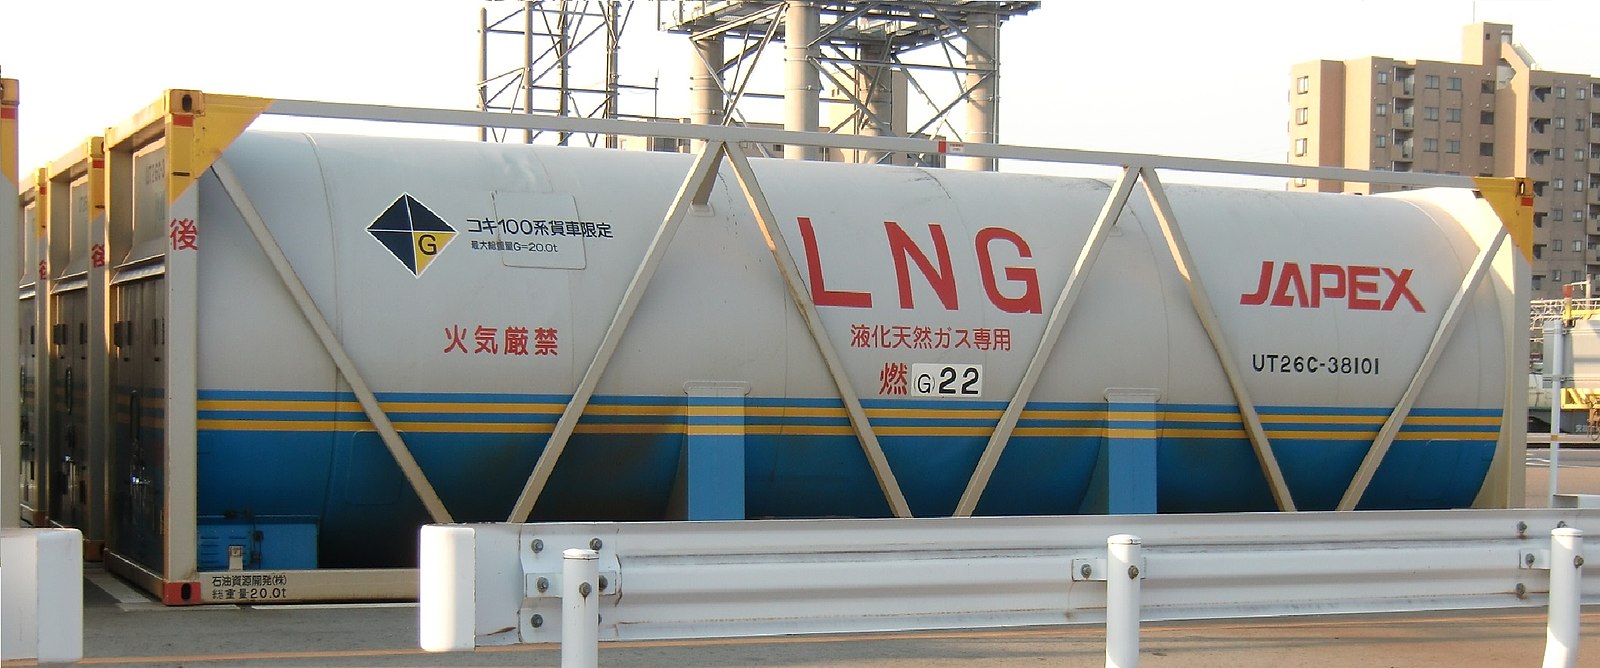 A liquefiednatural gas container